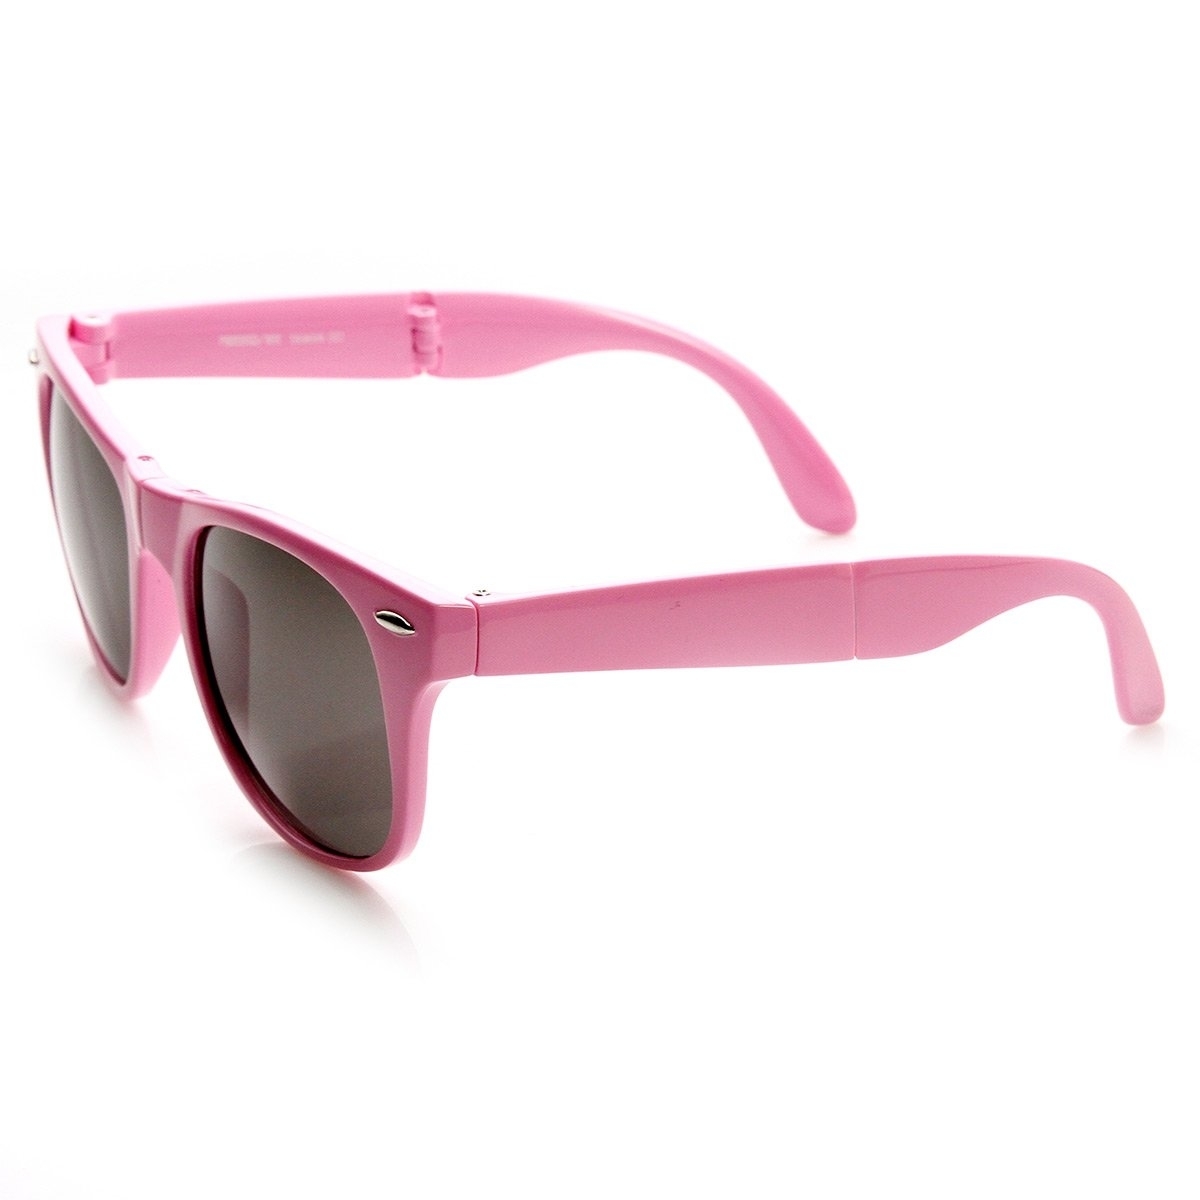 Neon Bright Colorful Compact Folding Pocket Horn Rimmed Sunglasses 54mm - Hot-Pink Smoke